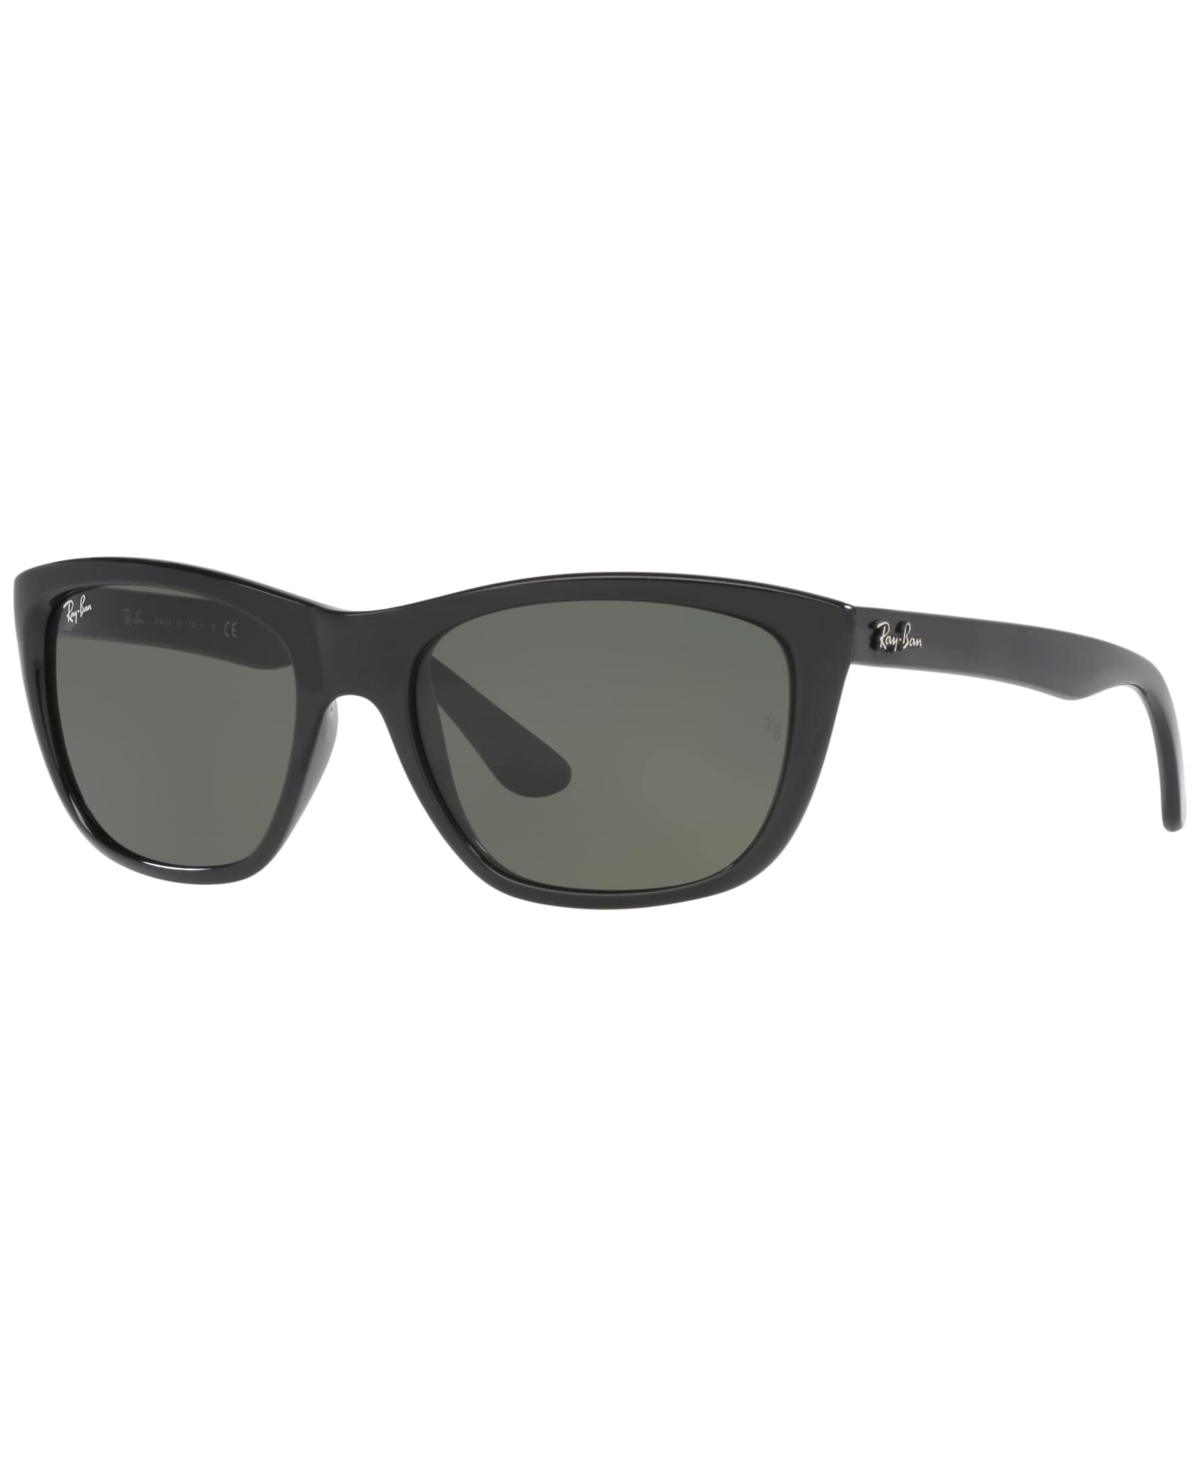 Ray Ban Women's Sunglasses, Rb415457-x 57 In Black